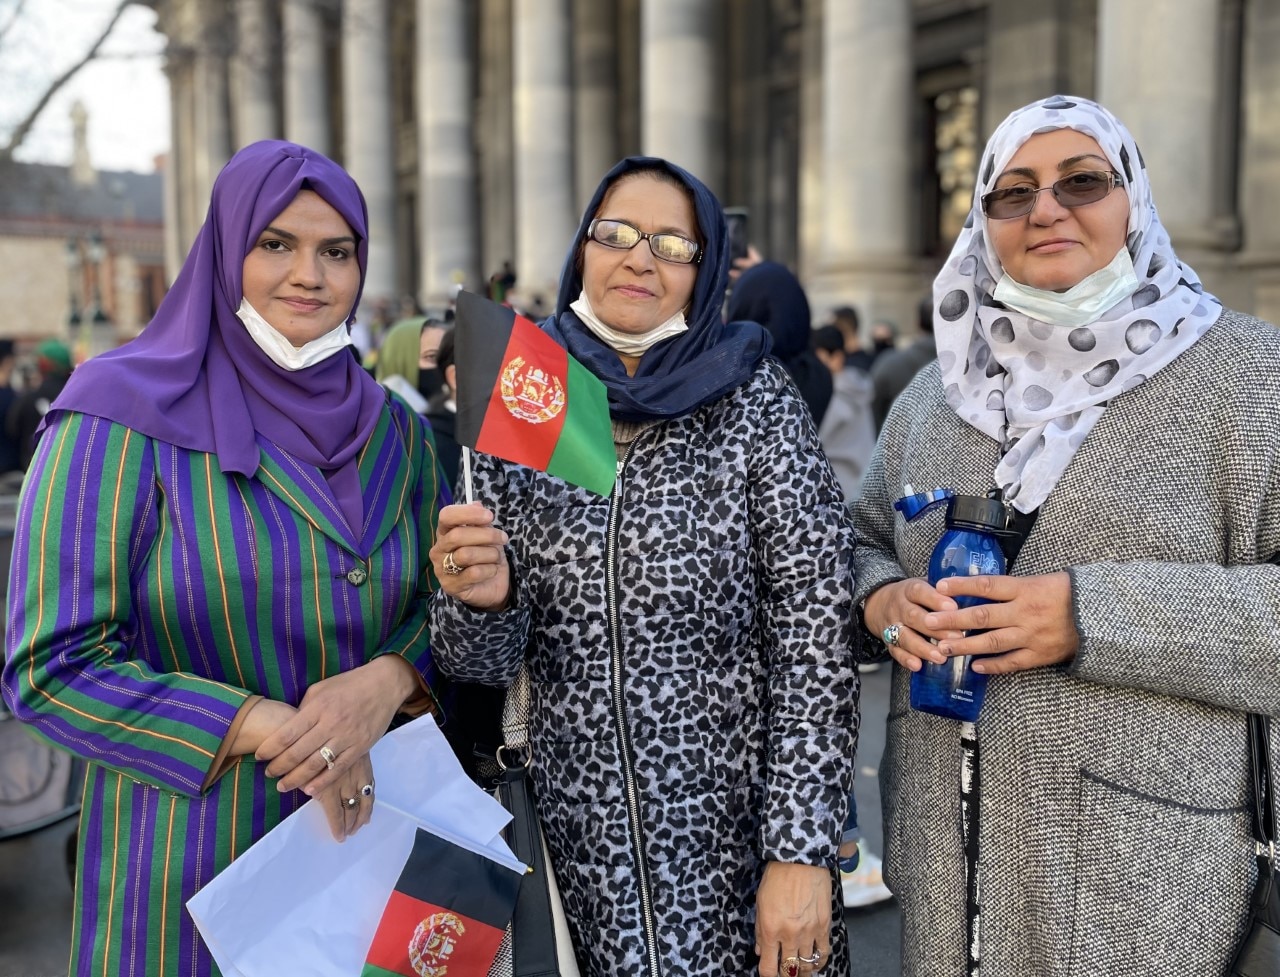 Afghan woman Yalba Siddiqui (left) marched in Adelaide on Saturday